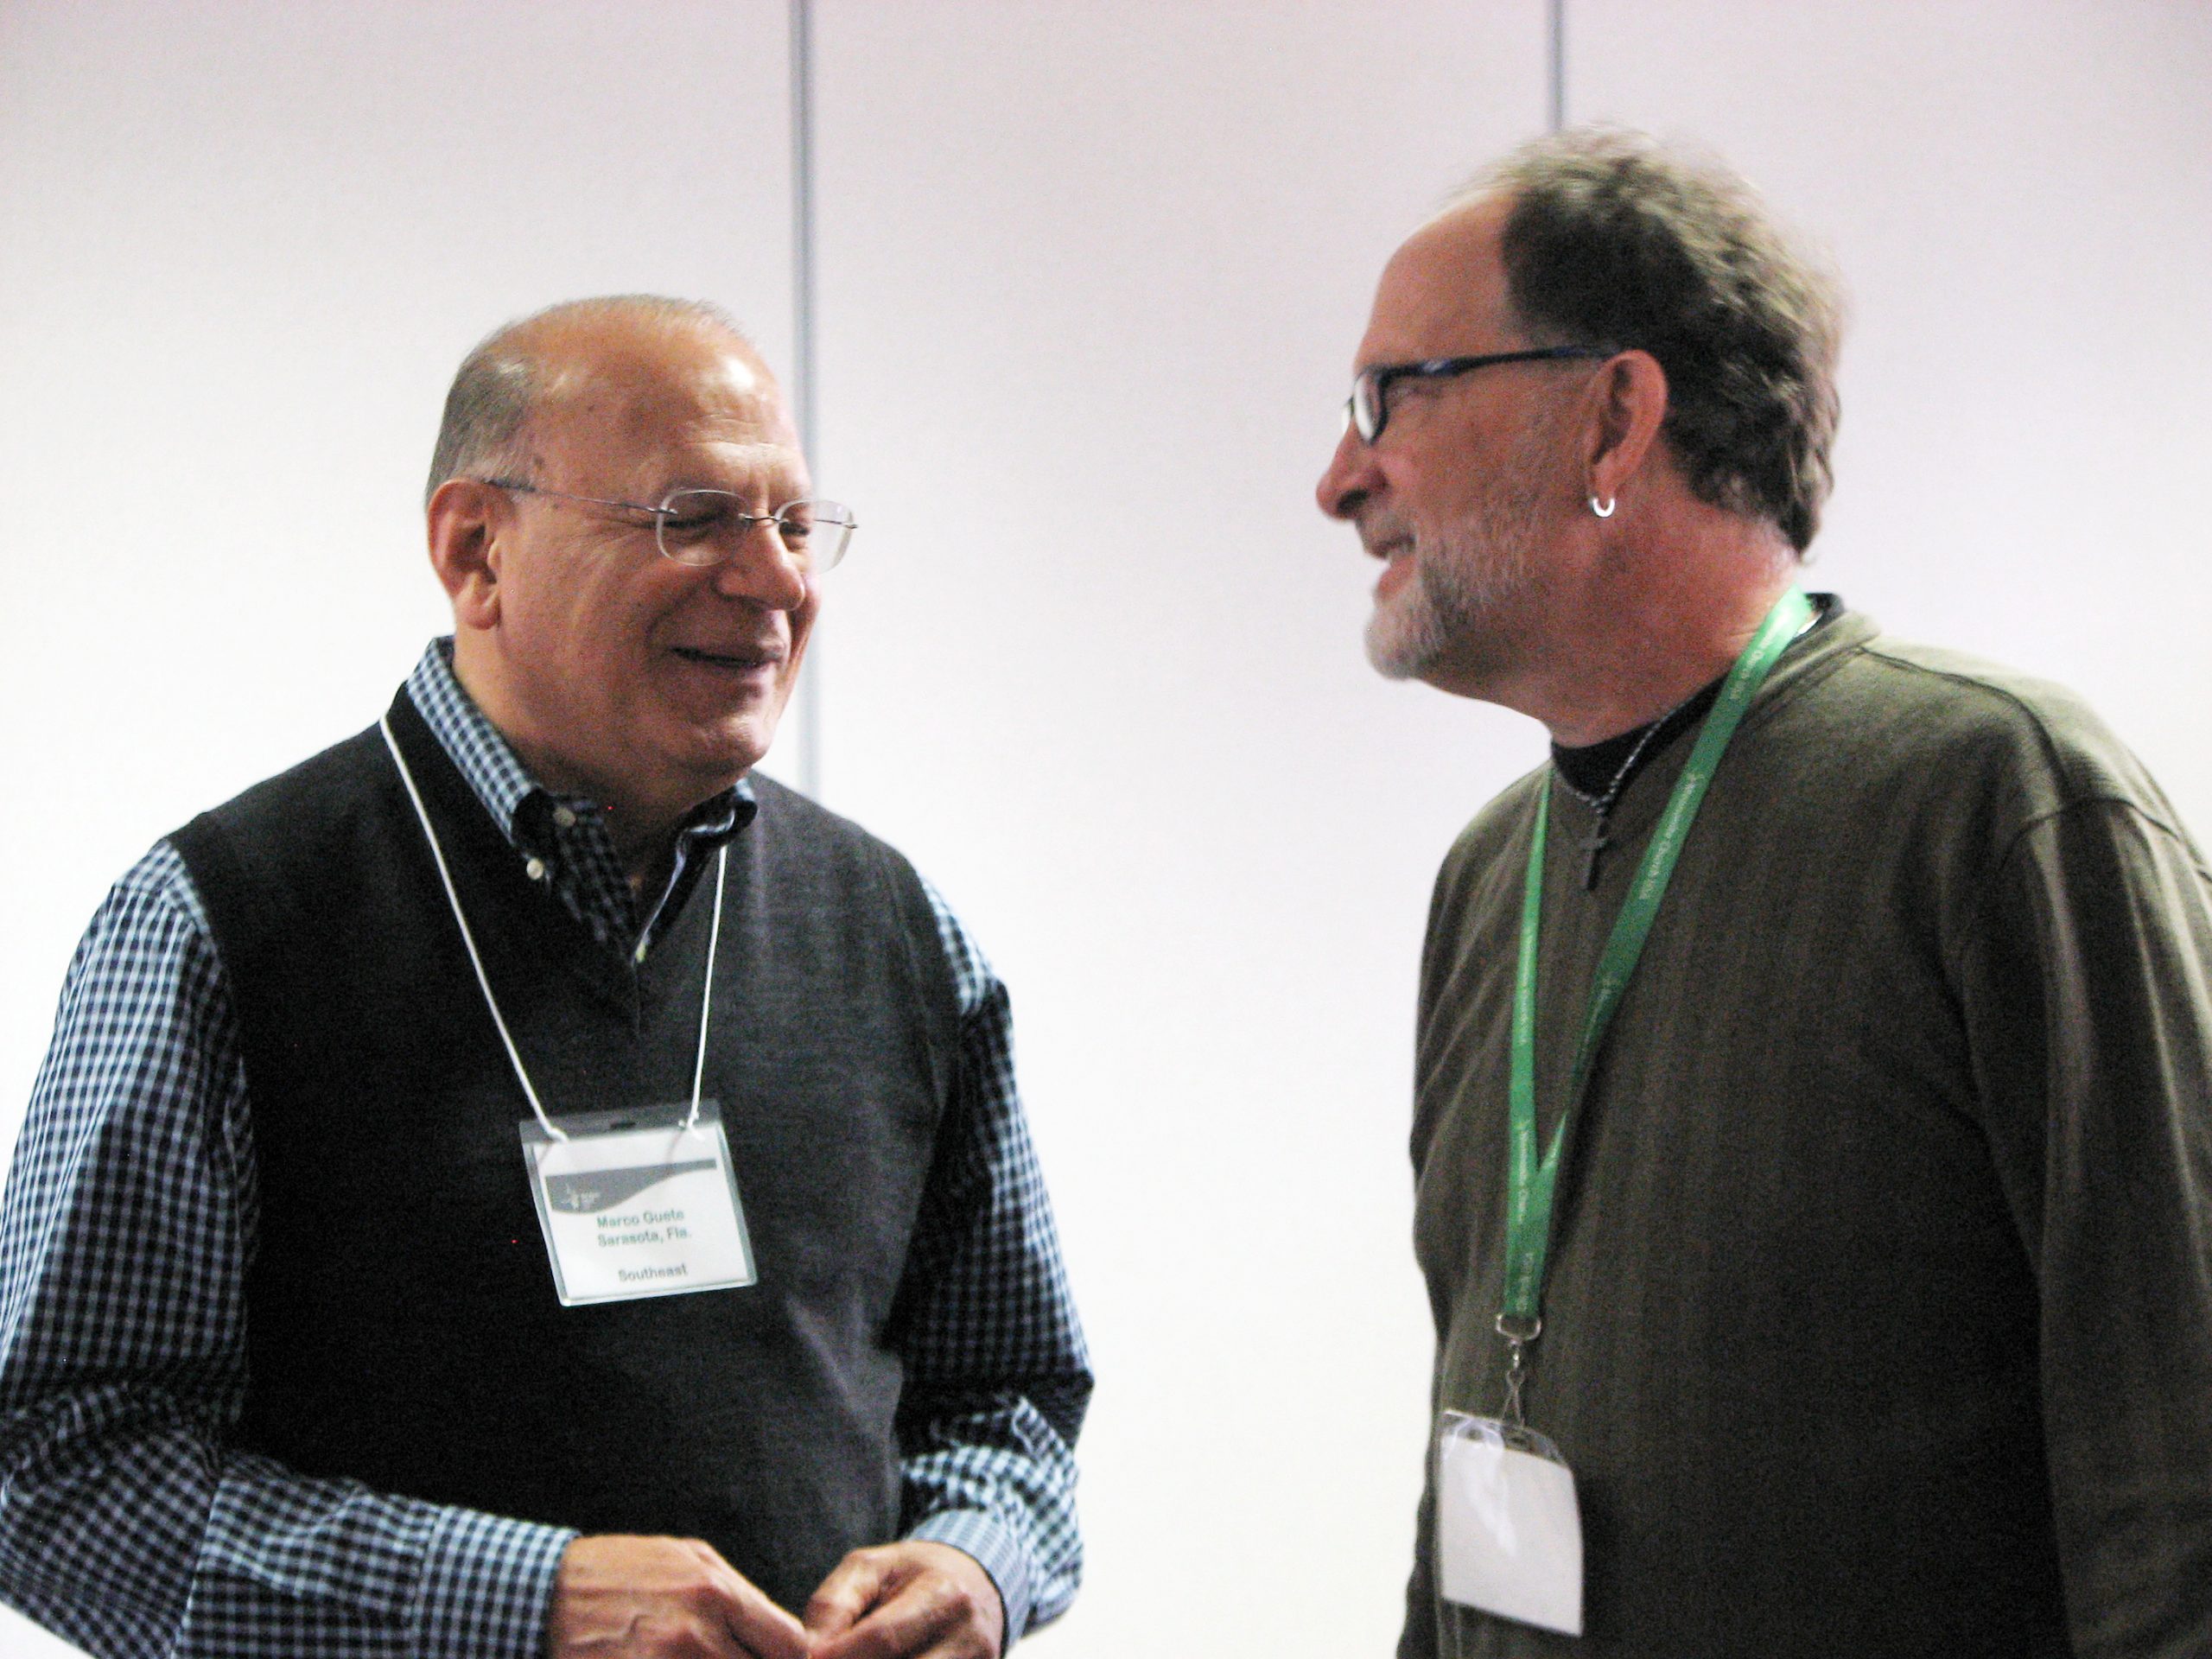 Marco Güete, executive conference minister for Southeast Mennonite Conference, talks with Michael Zehr, Southeast Mennonite Conference moderator, at the March Constituency Leaders Council meeting at Silverwood Mennonite Church in Goshen, Indiana. (Photo by Annette Brill Bergstresser)